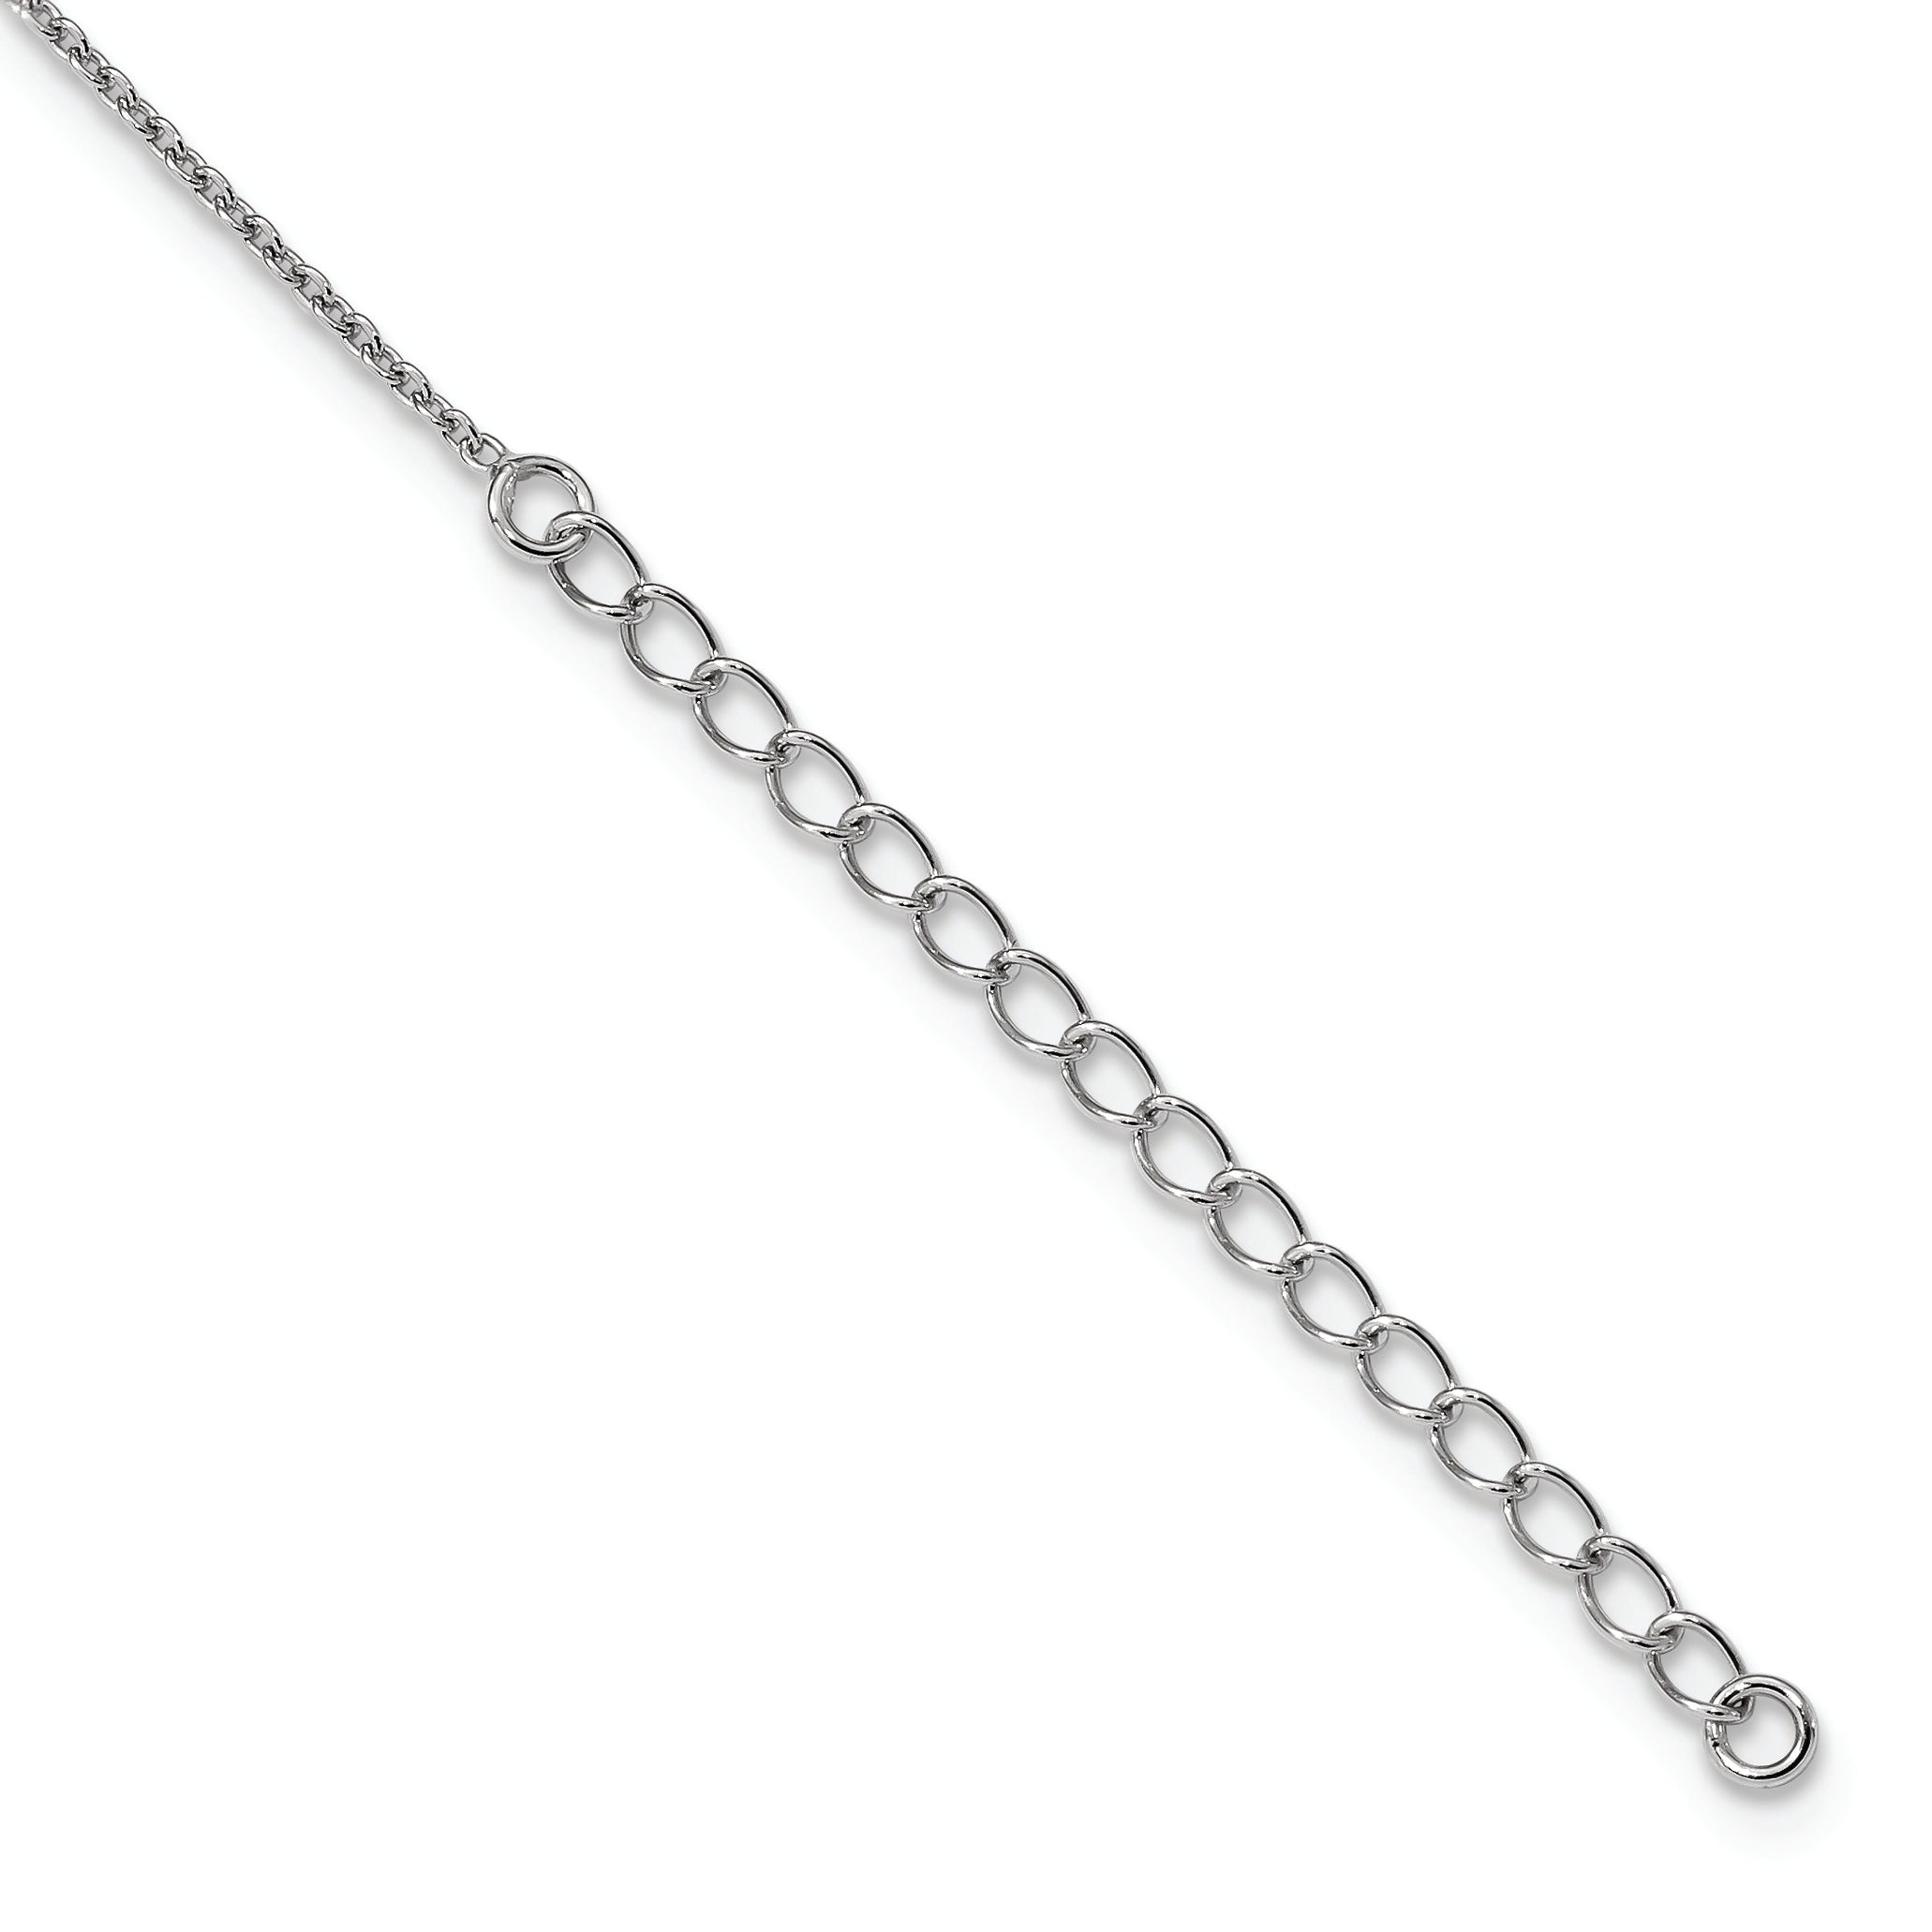 Brilliant Embers Sterling Silver Rhodium-plated 85 Stone 18 inch Micro Pav‚ White and Green CZ Snake Necklace with 2 Inch Extender